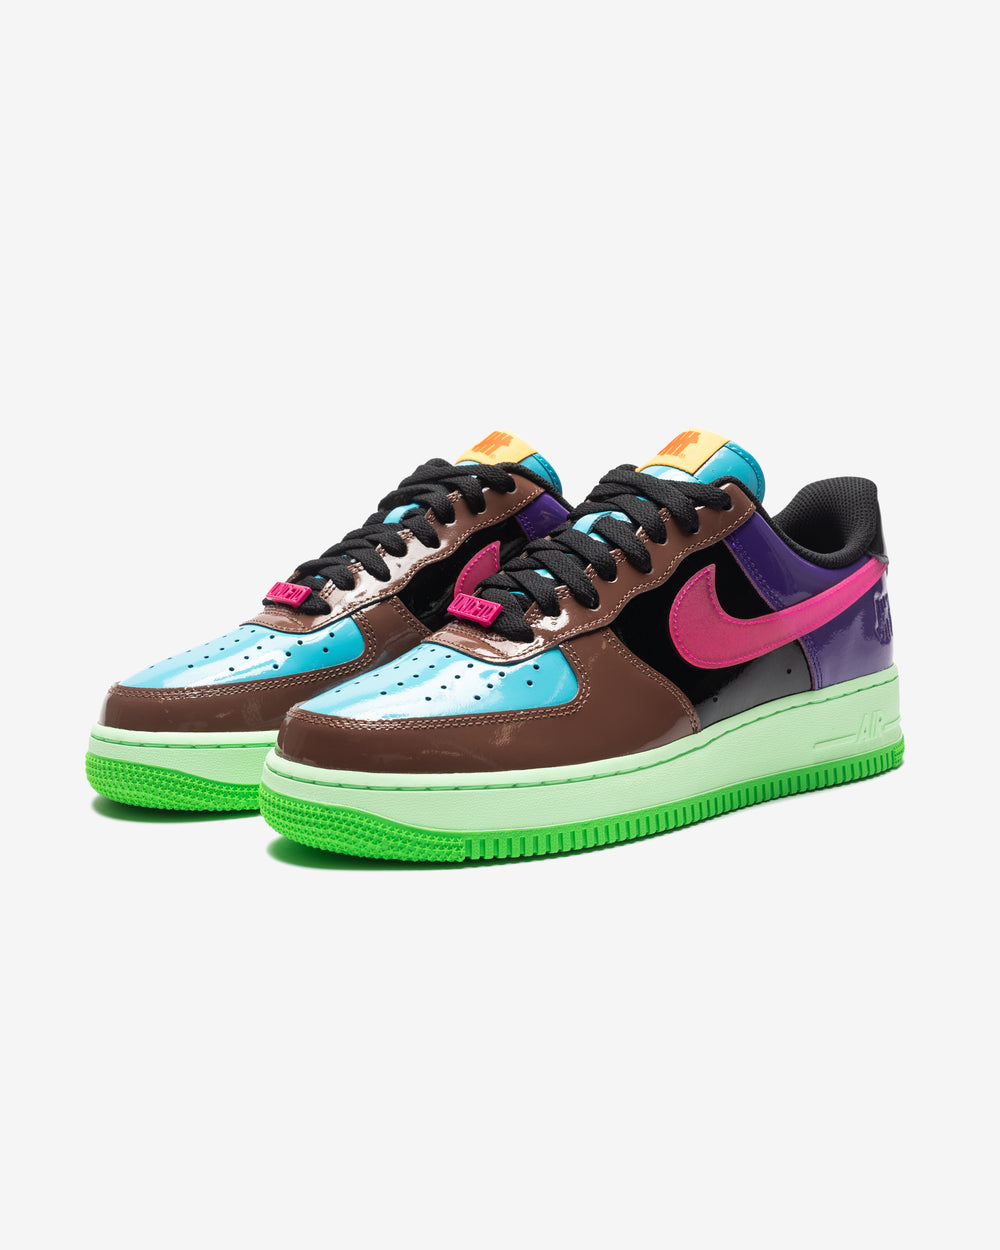 UNDEFEATED × NIKE AIR FORCE 1 LOW